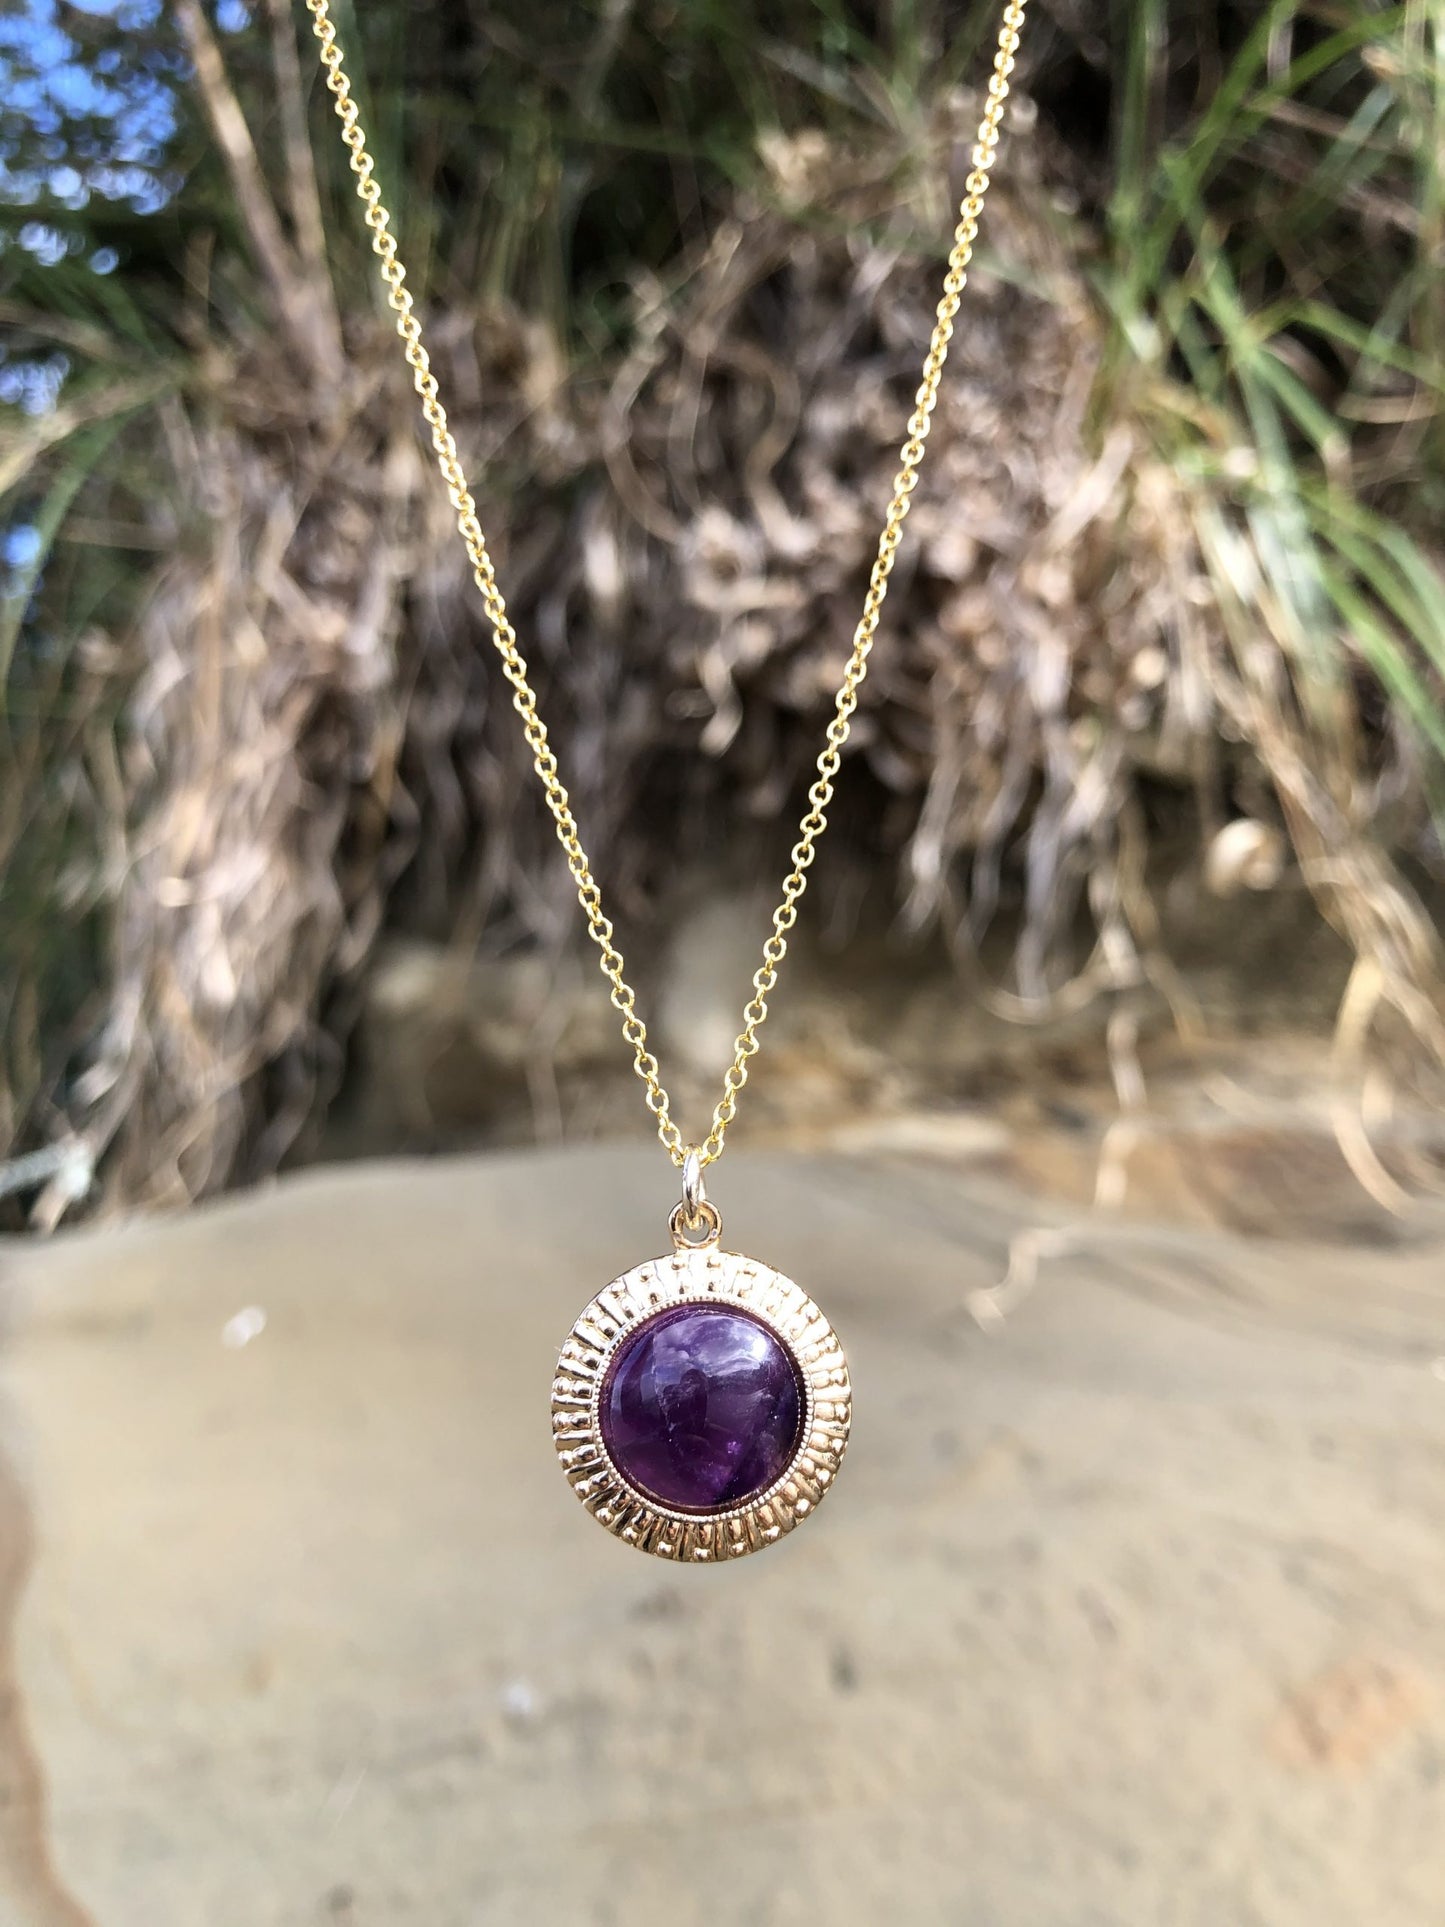 Necklace with rich, dark purple Amethyst, hand polished to a 14mm round cabochon and set in a gold plated setting with 19 inch chain.